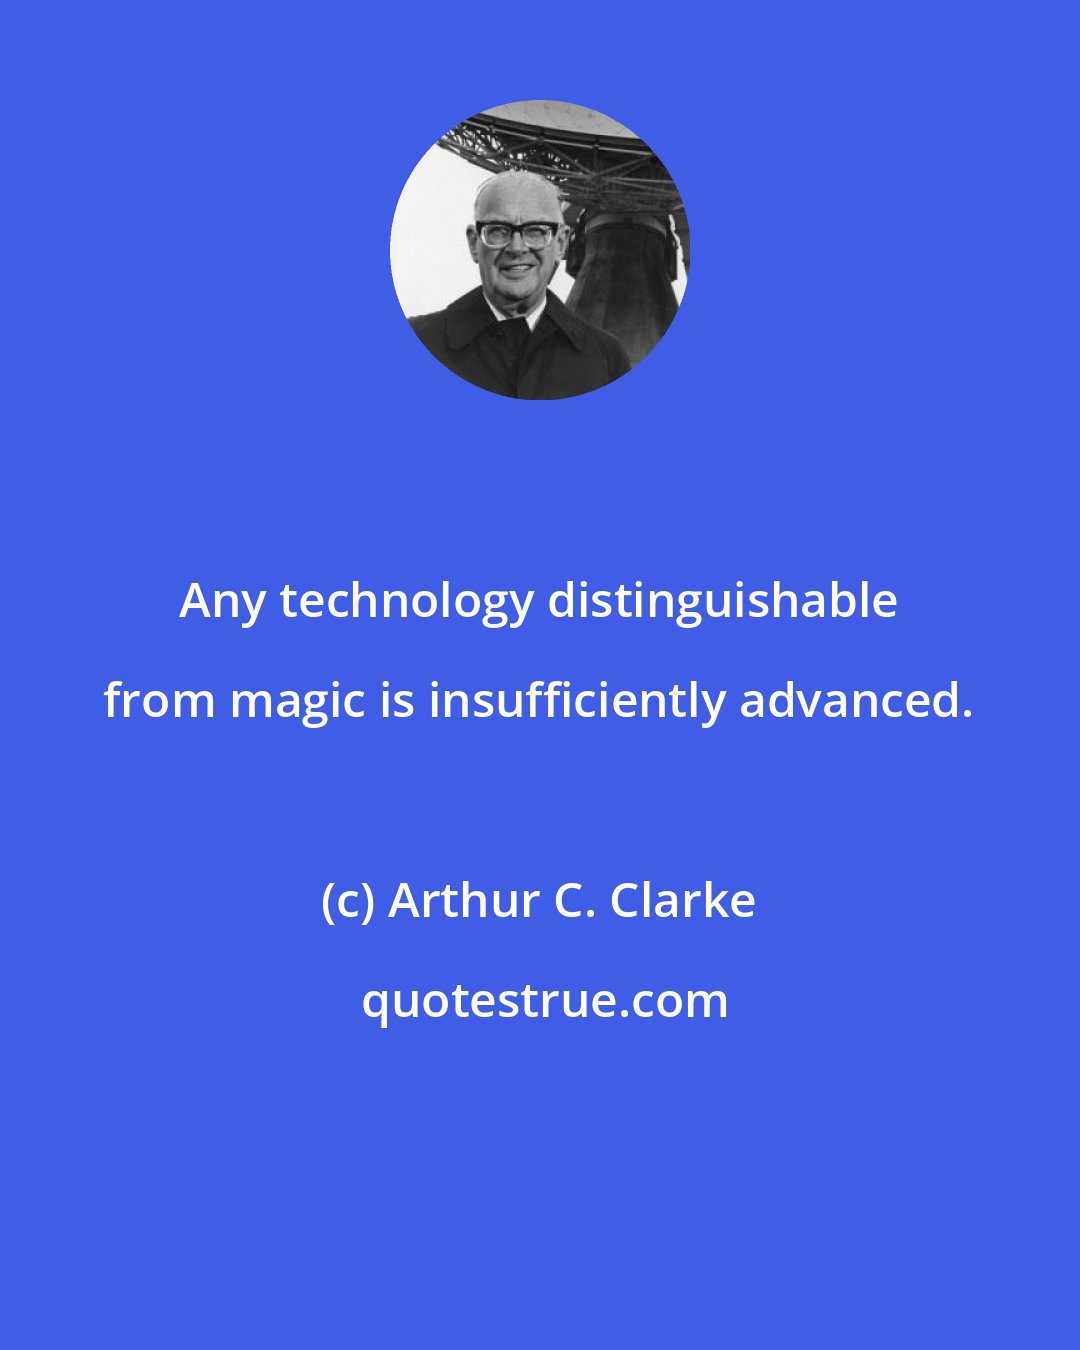 Arthur C. Clarke: Any technology distinguishable from magic is insufficiently advanced.